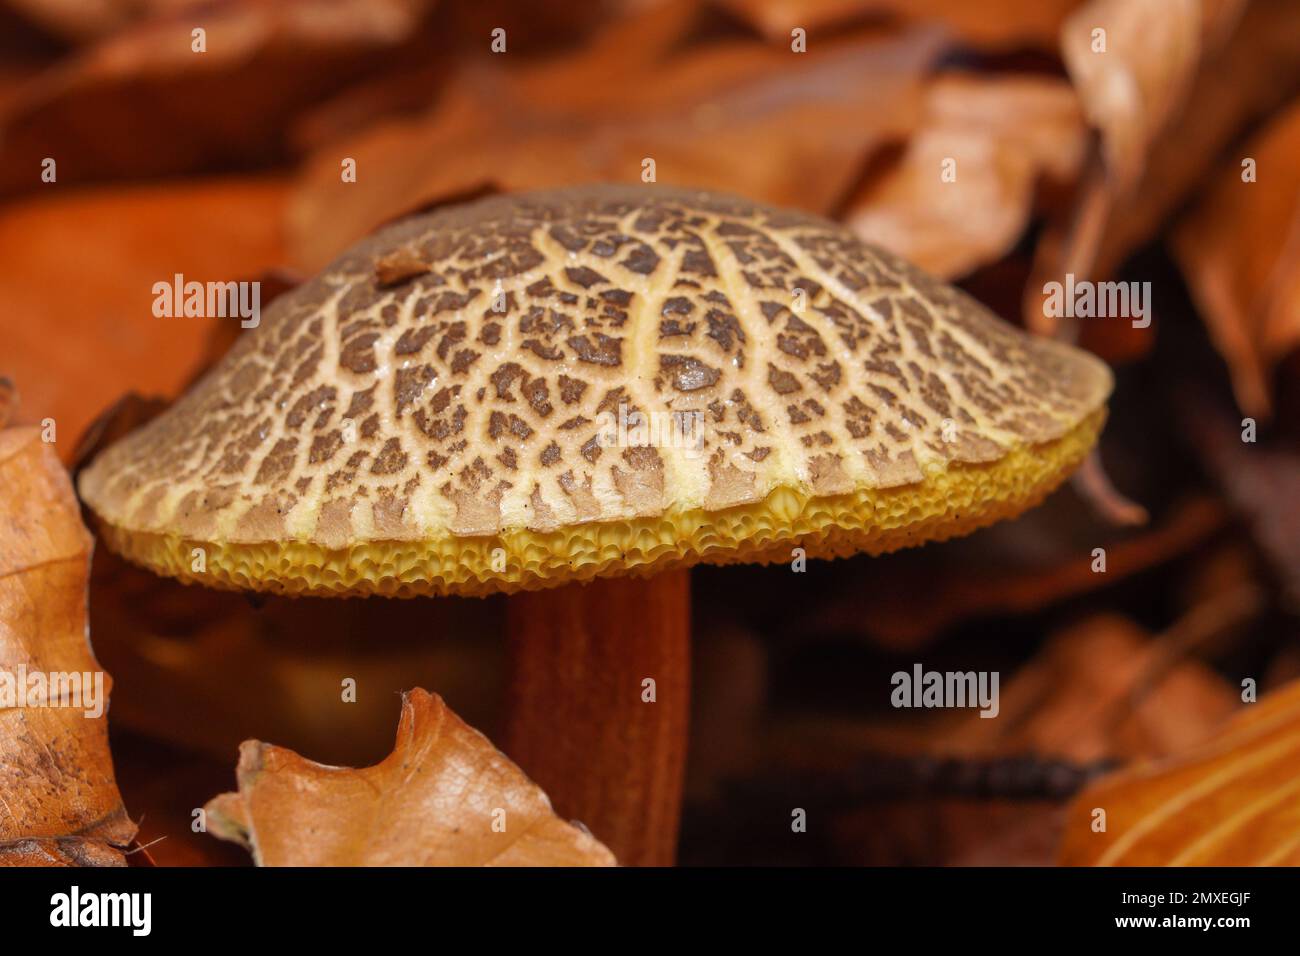 A closeup of a mushroom's cap surrounded by fallen leaves on the ground Stock Photo